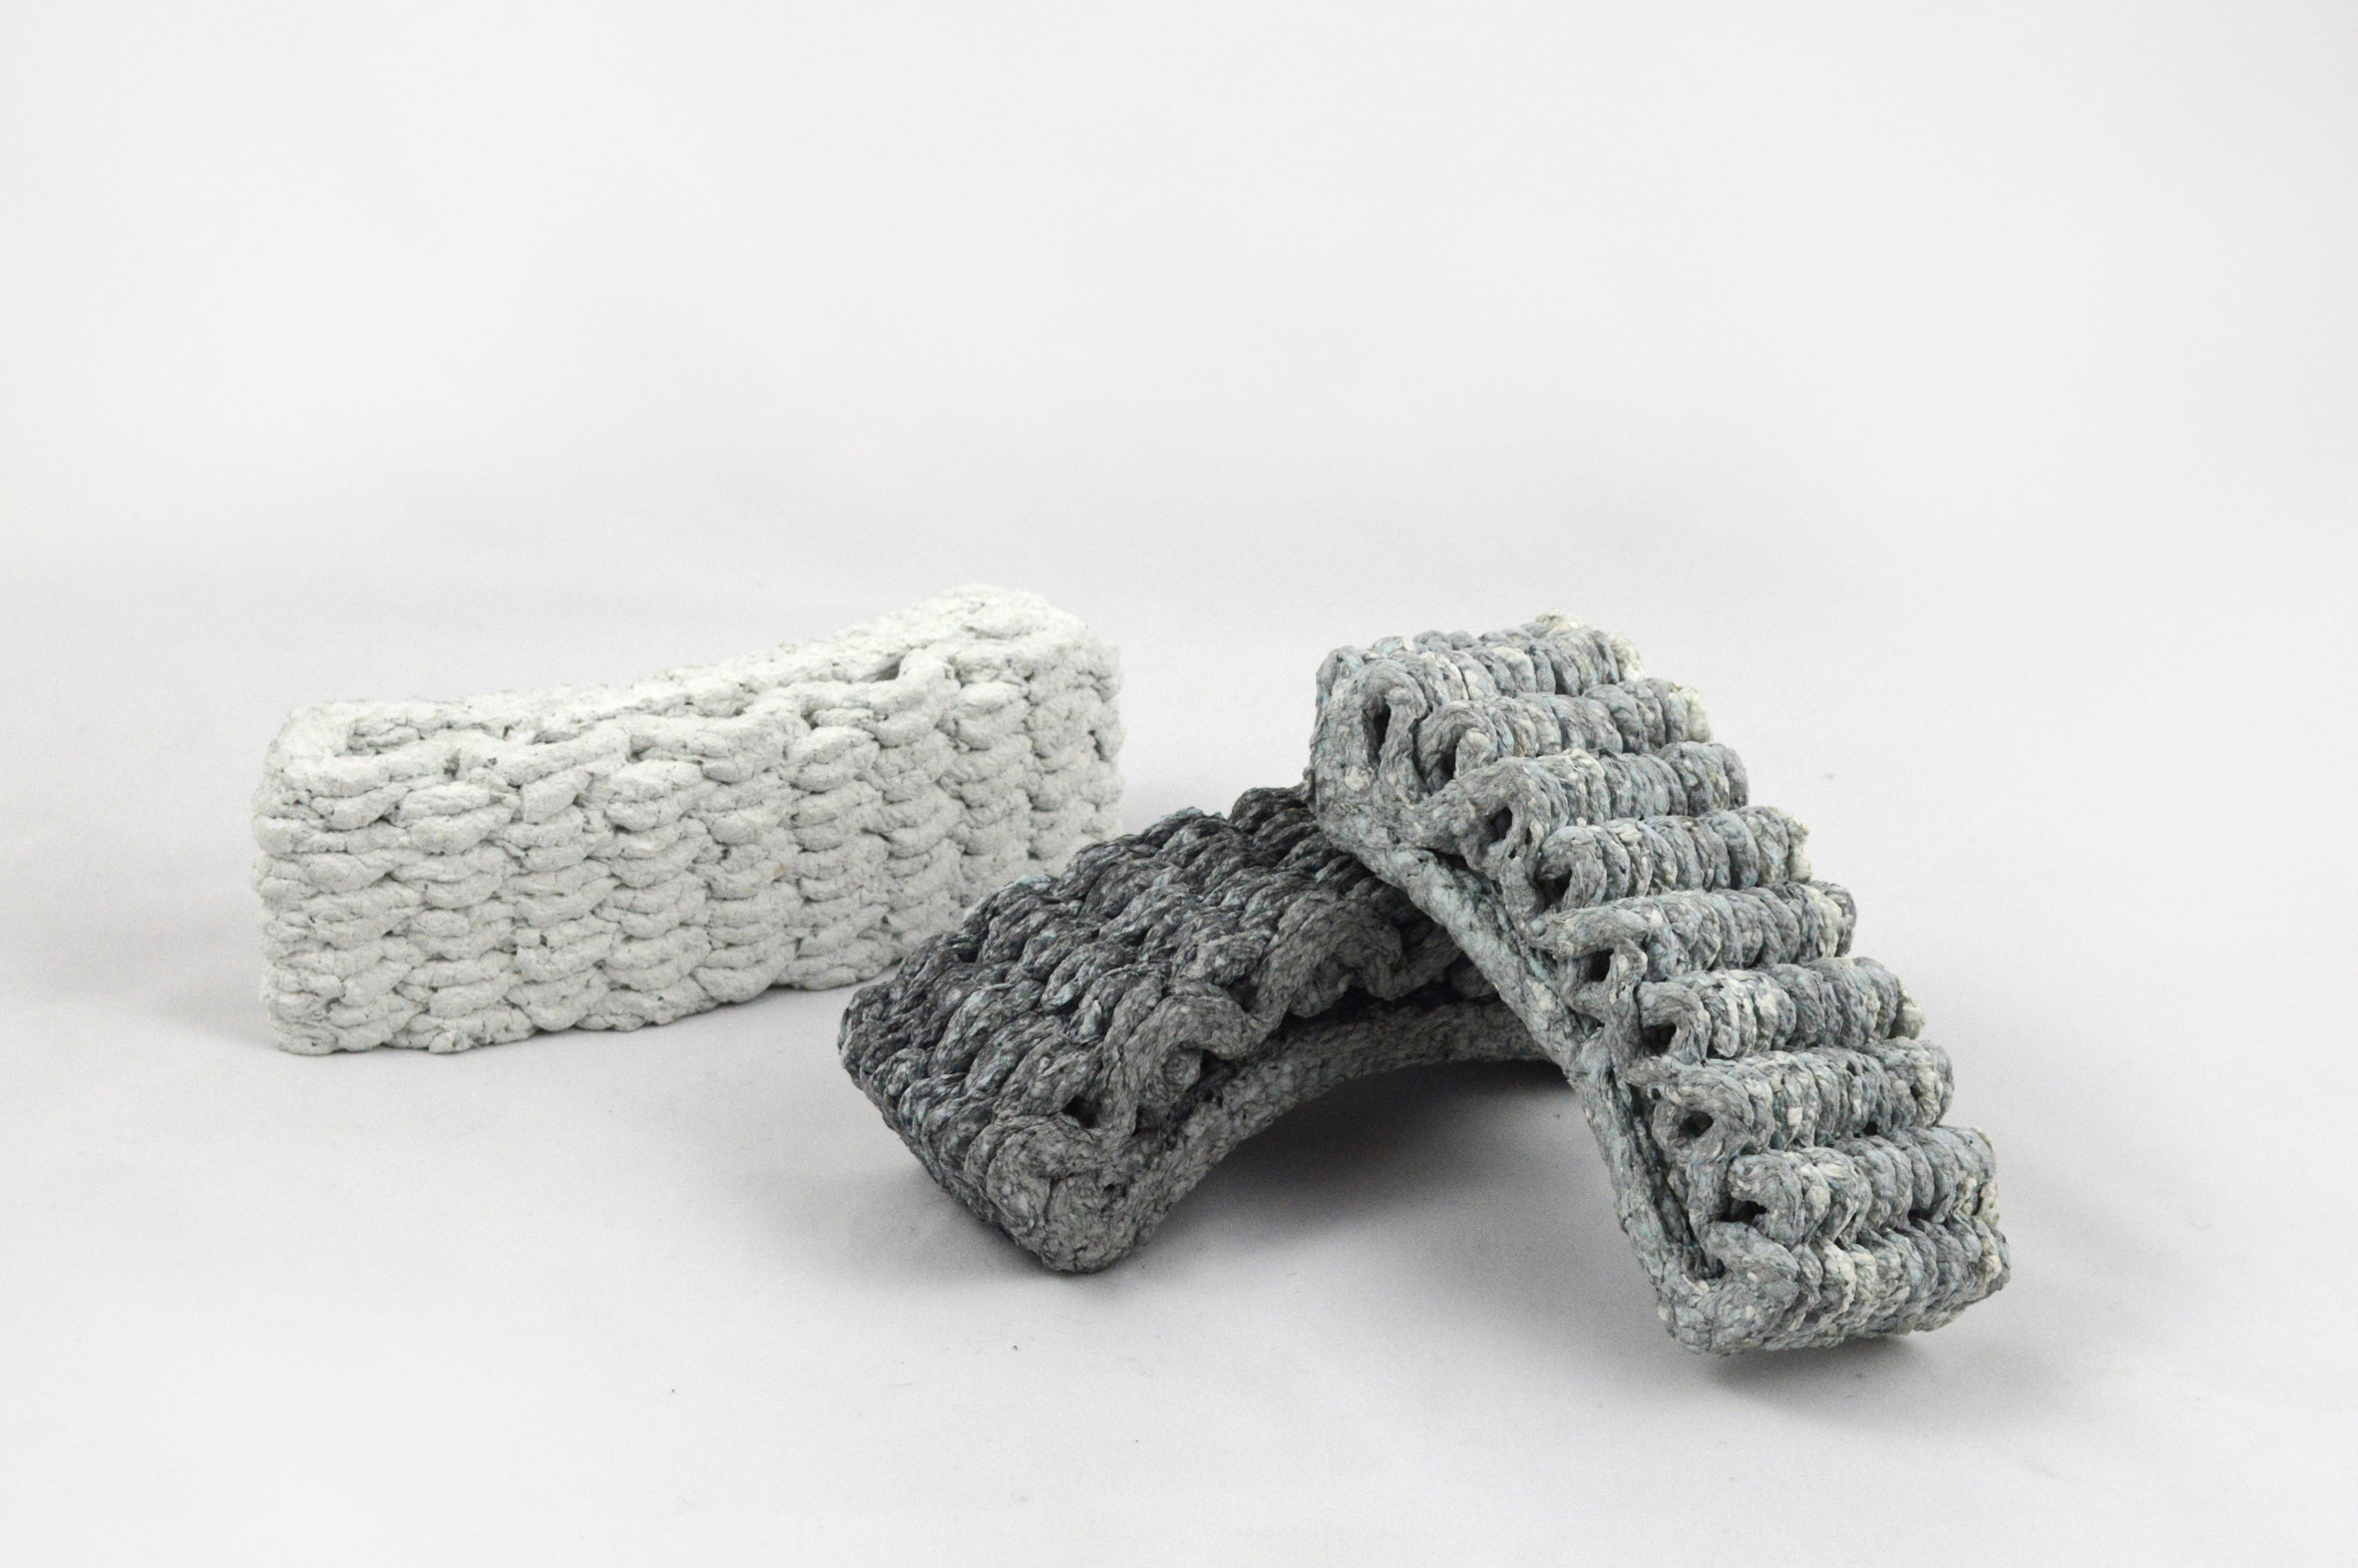 Design Academy Eindhoven graduate designs 3D printer that uses recycled paper